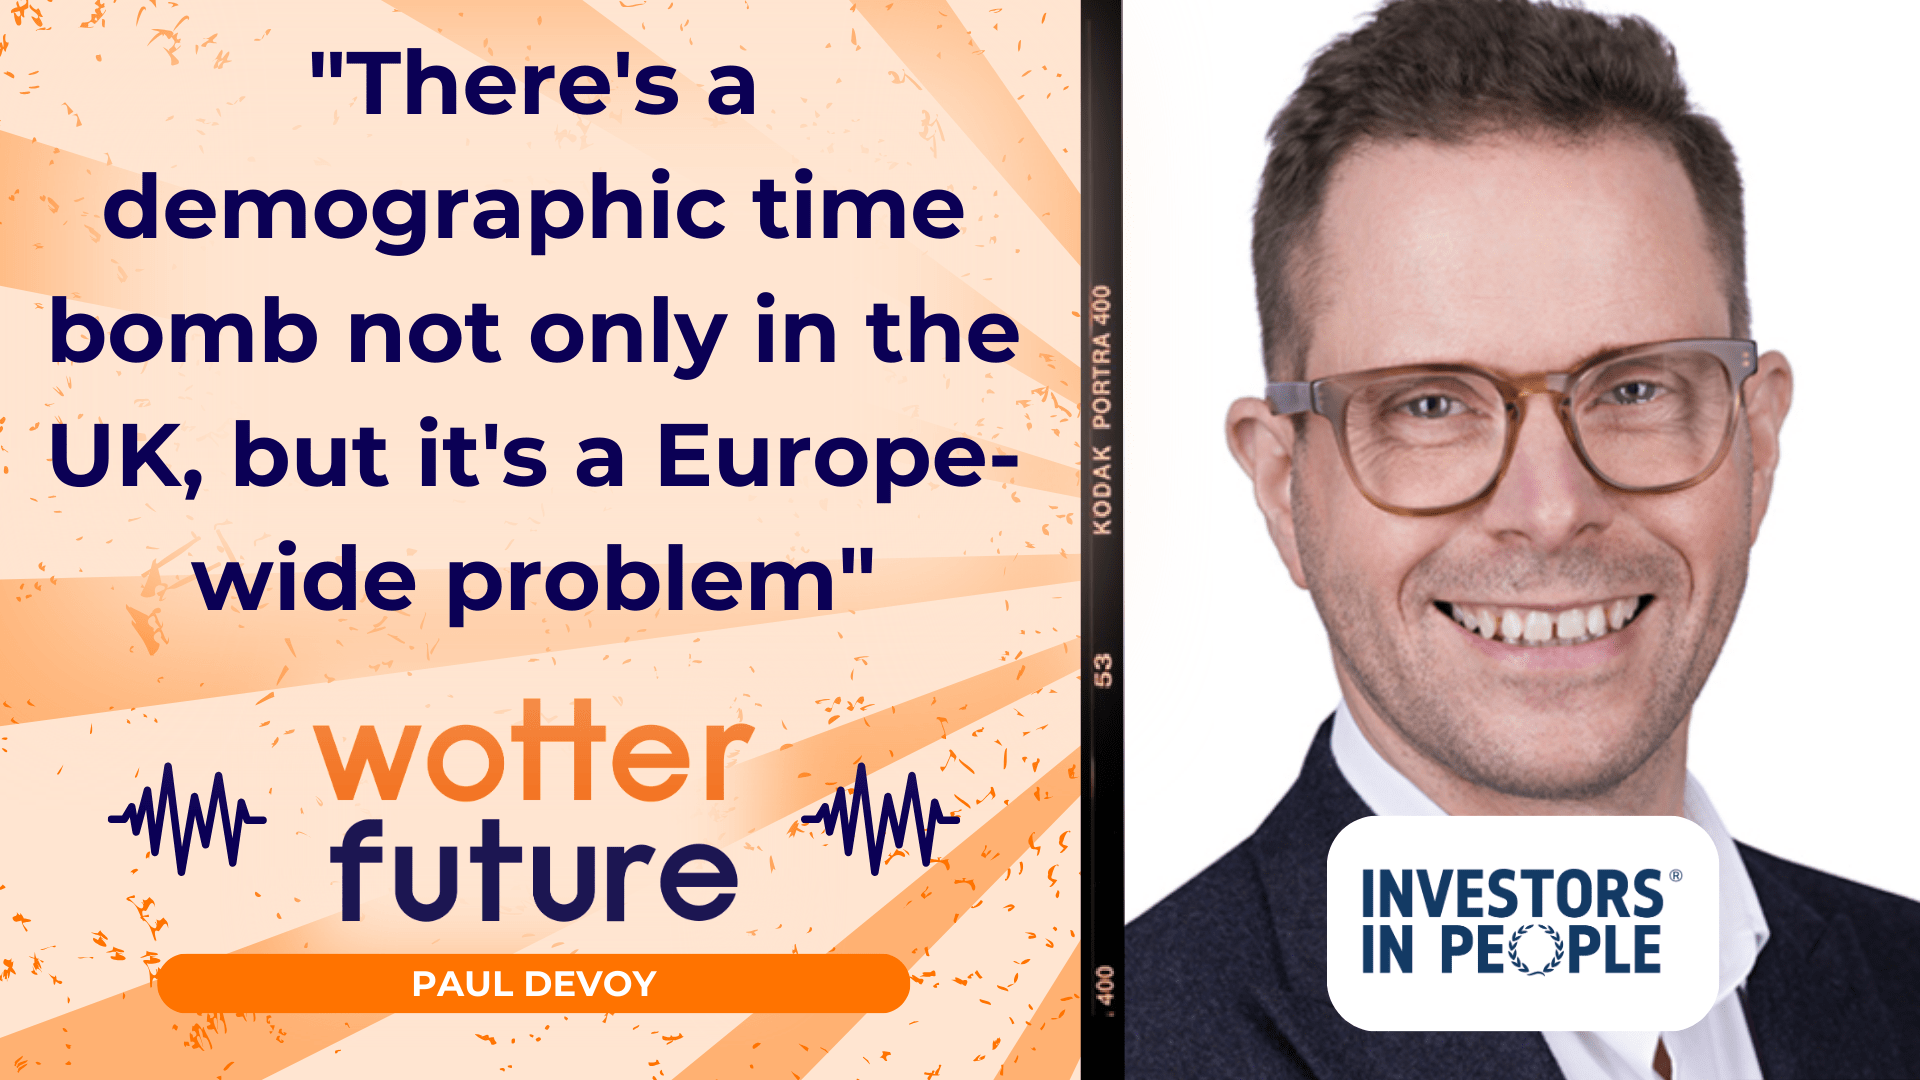 Split image, Paul Devoy smiling on one side with the Investors in People log under his face, the other side reads "There's a demographic time bomb not only in the UK, but it's a Europe-wide problem" with the Wotter Future logo underneath the text.